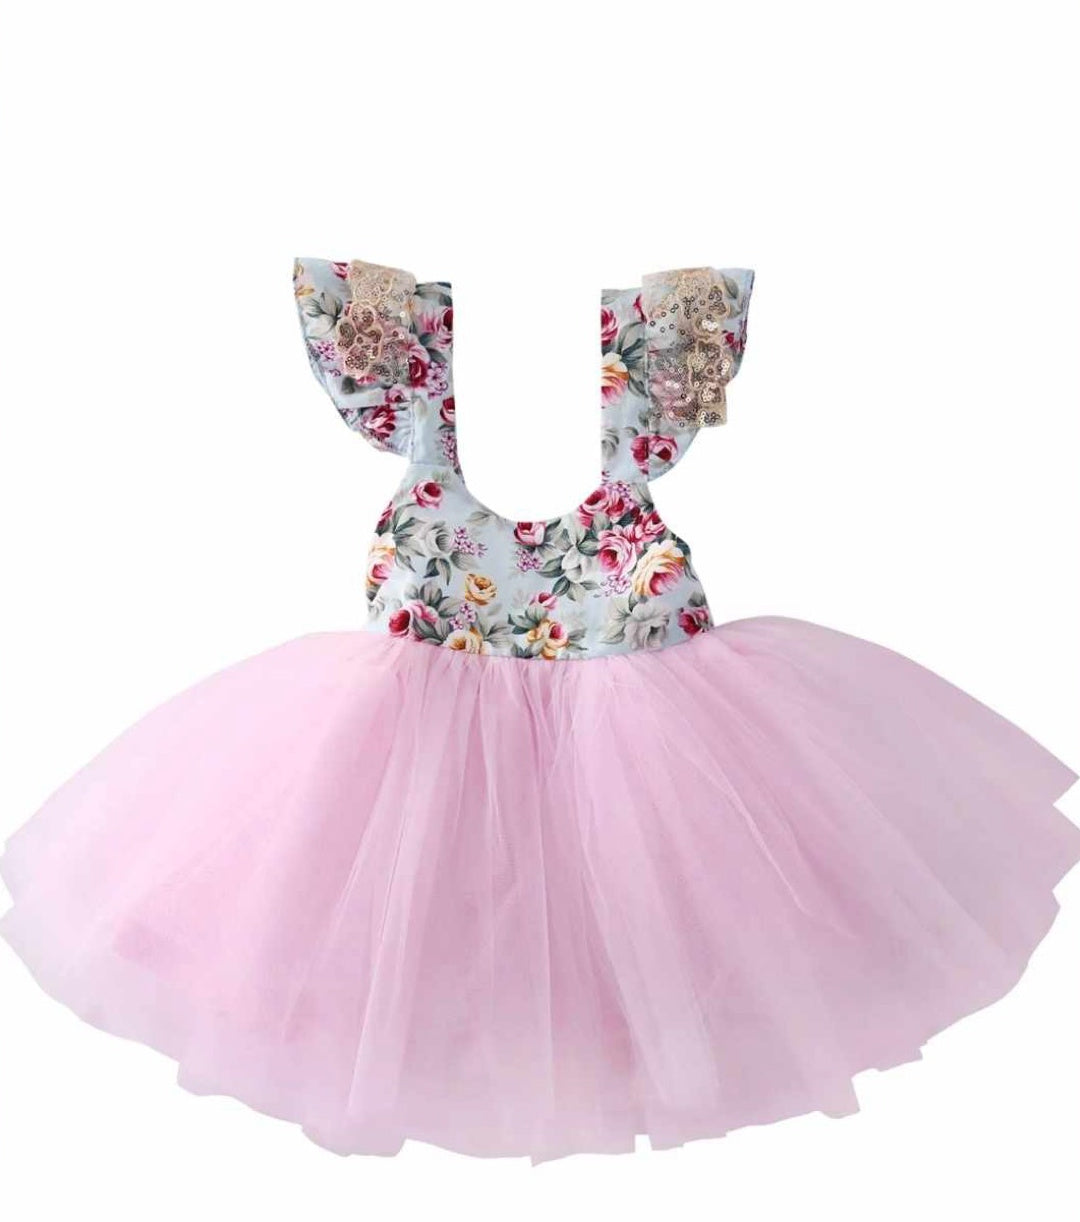 Baby Girls Zoe Aqua Floral with Pink Tulle Skirt Dress